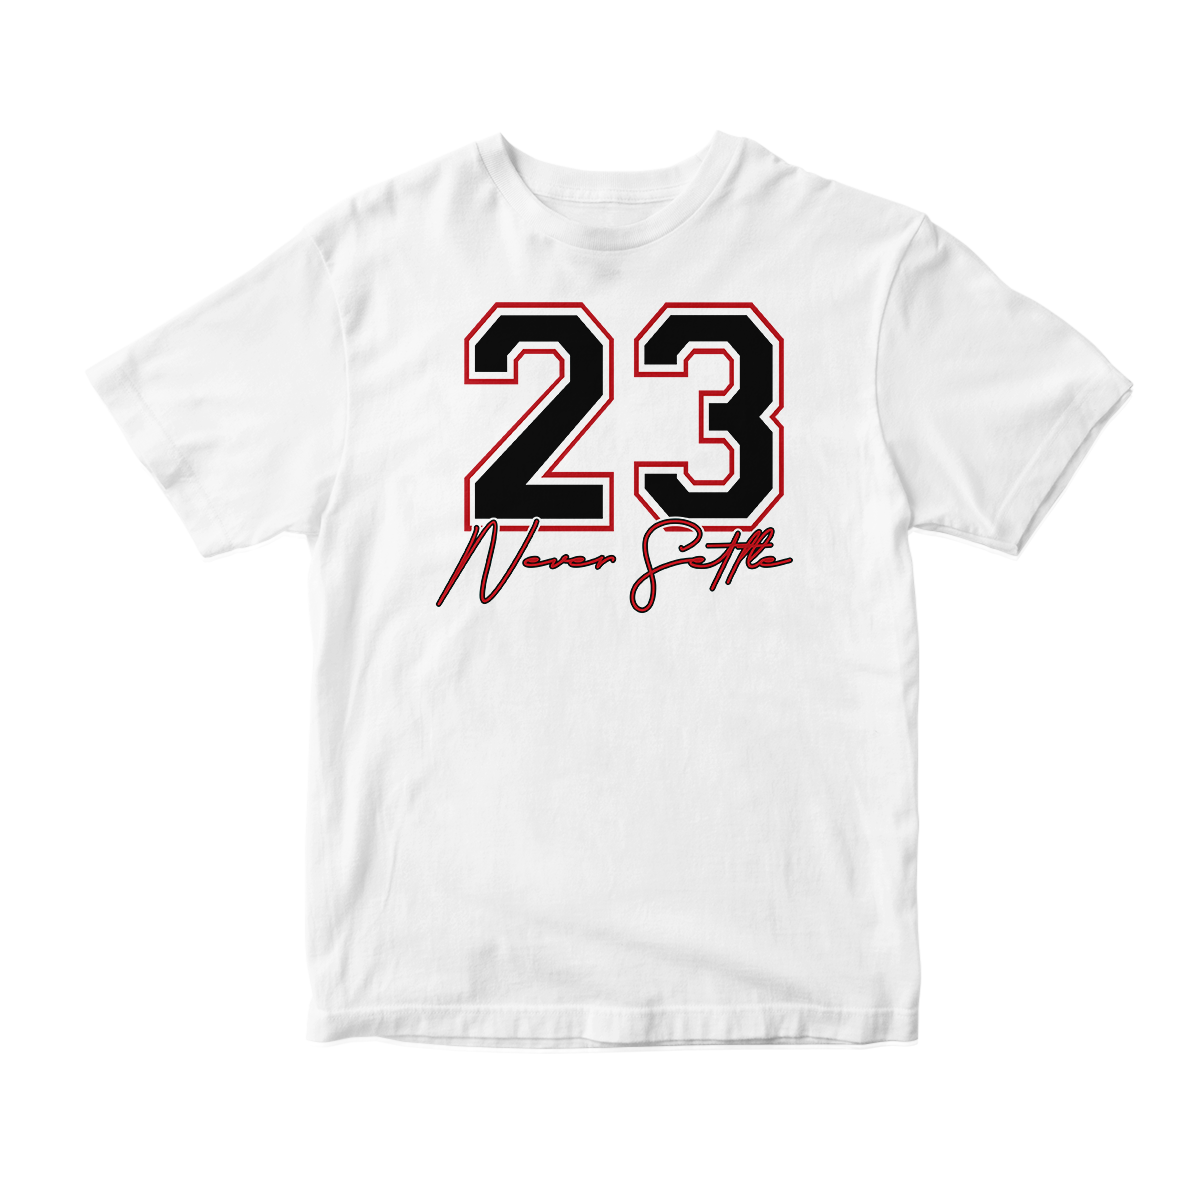 'Never Settle' in Bred 11 CW Short Sleeve Tee